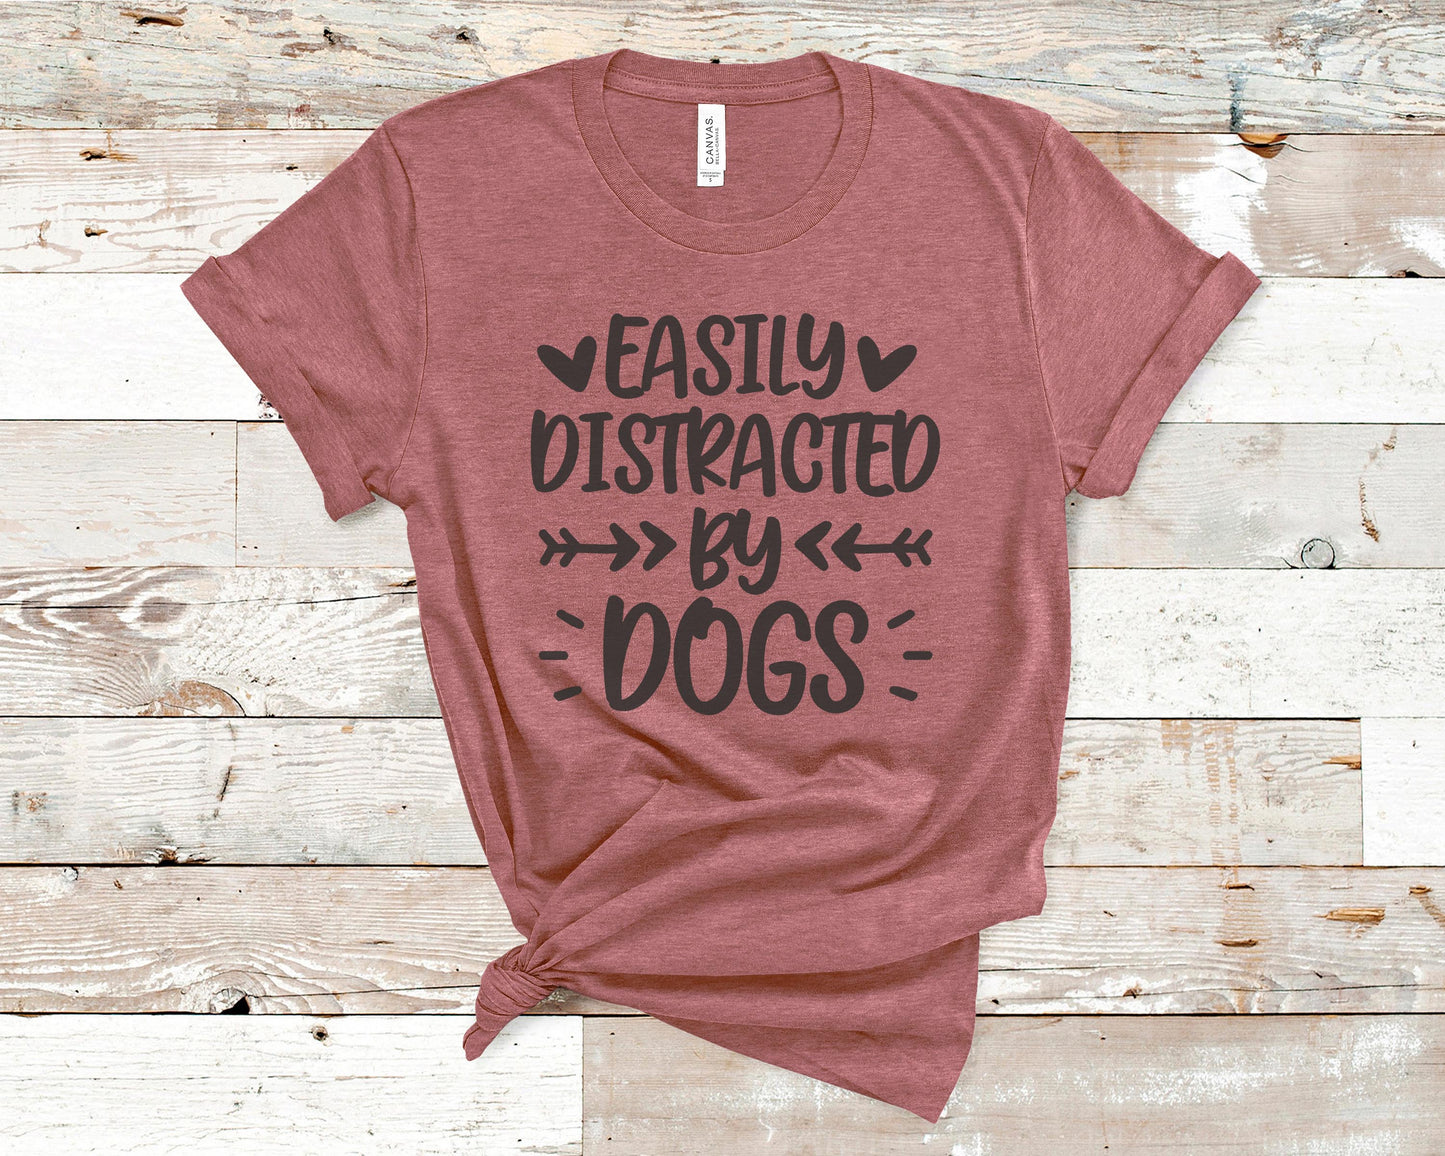 Easily Distracted by Dogs - Pet Lovers Shirt